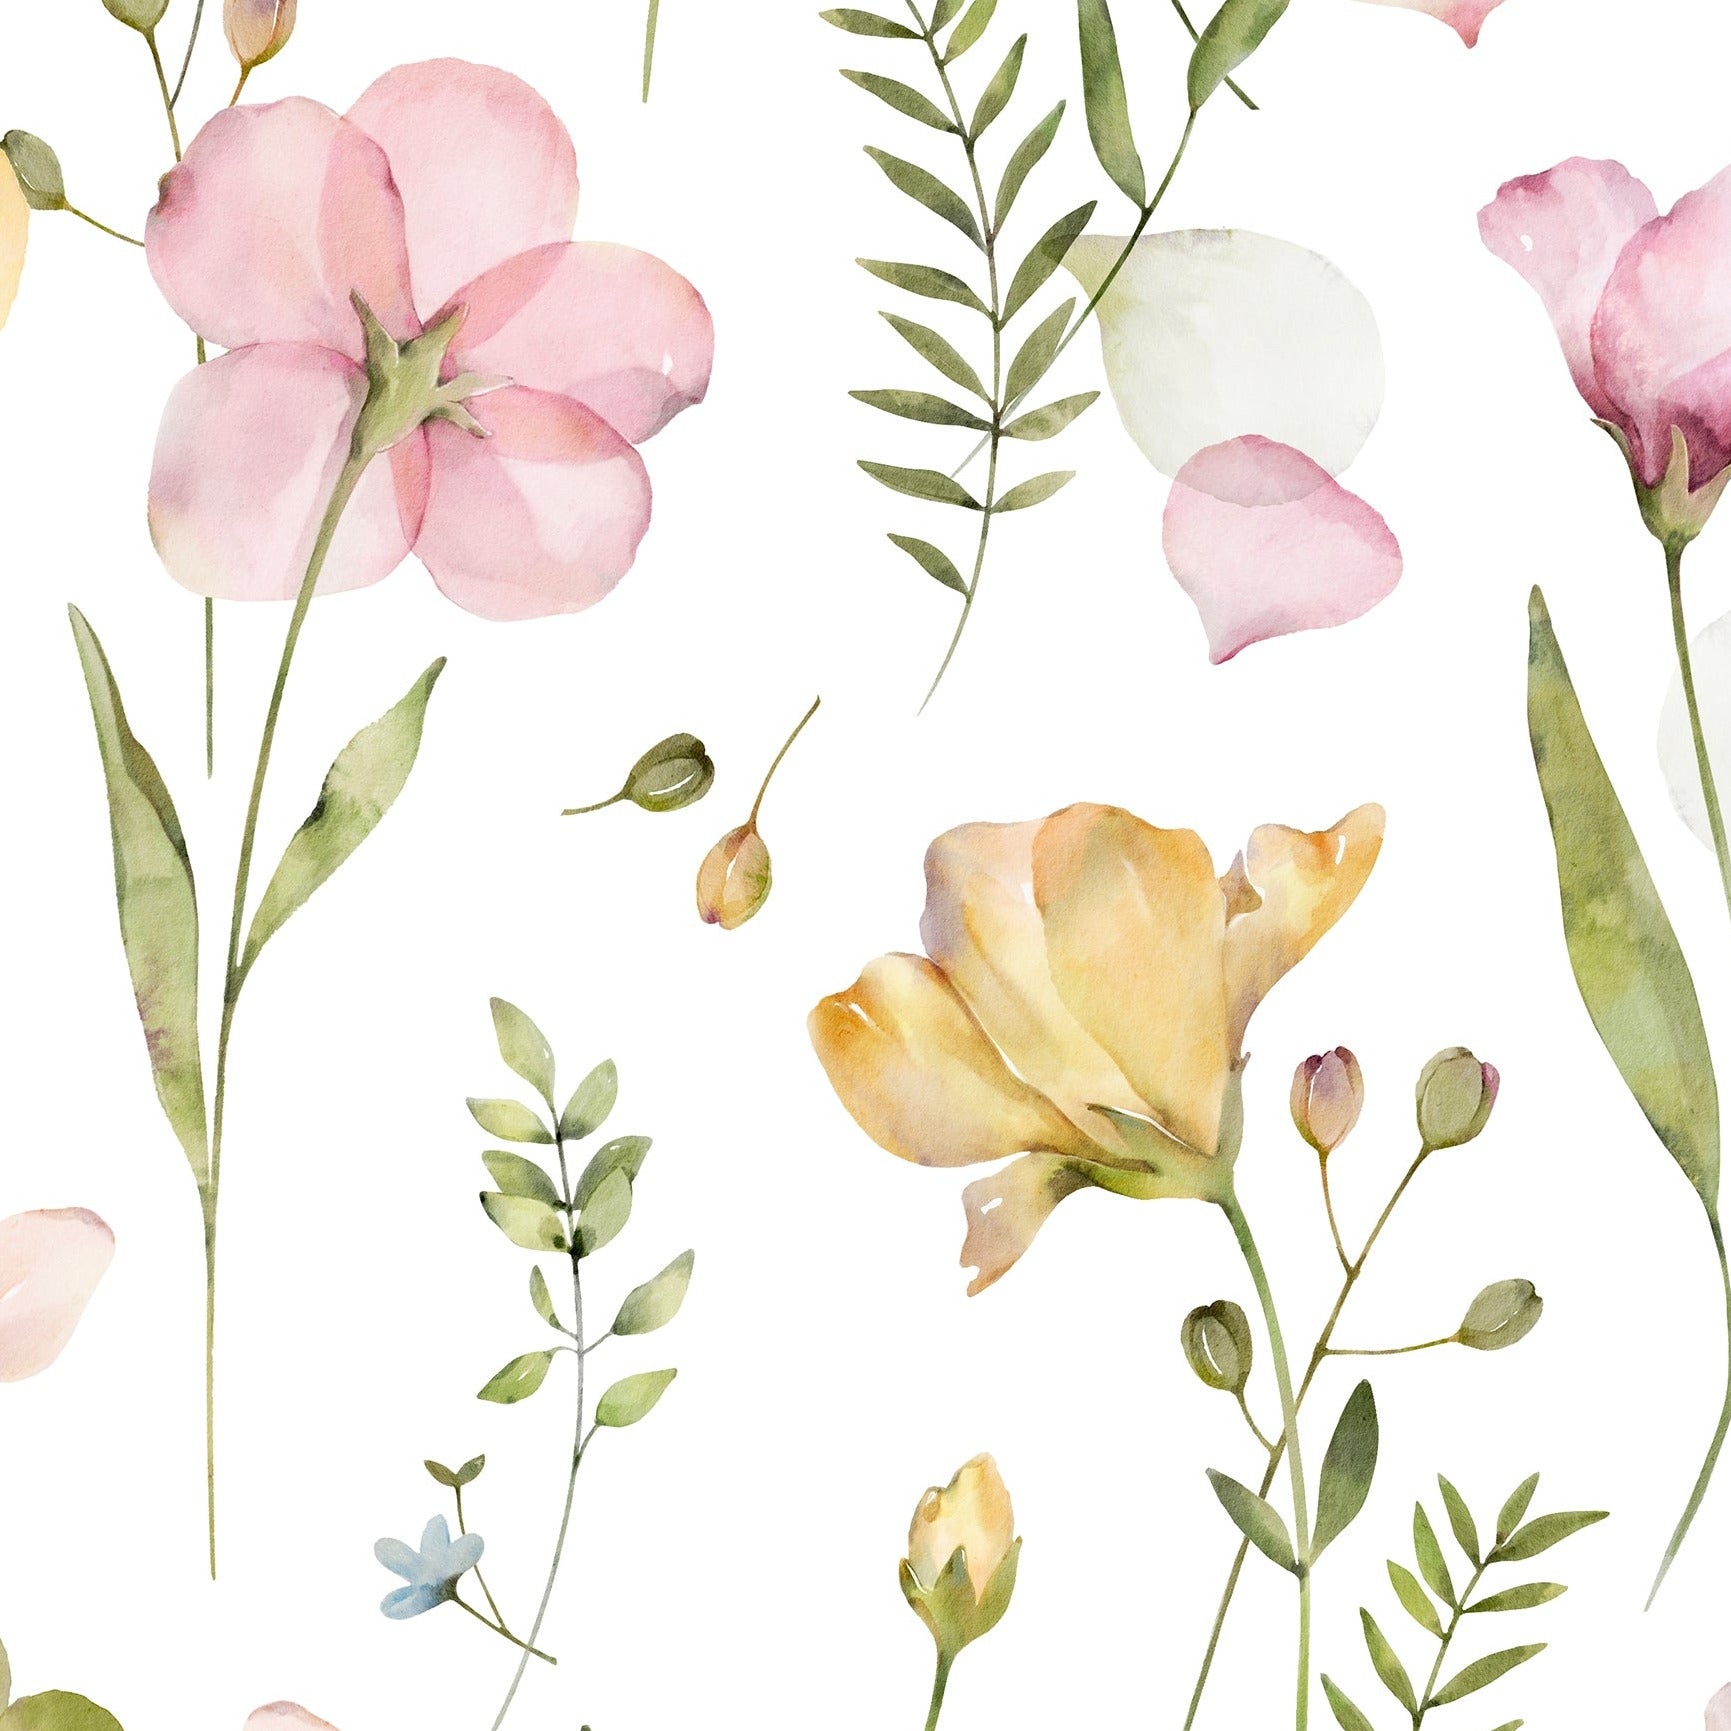 A close-up view of the Serene Floral Wallpaper showcasing its beautiful watercolor floral pattern with pink and yellow flowers intertwined with green foliage. The details of the petals and leaves are highlighted, conveying a fresh and tranquil vibe.